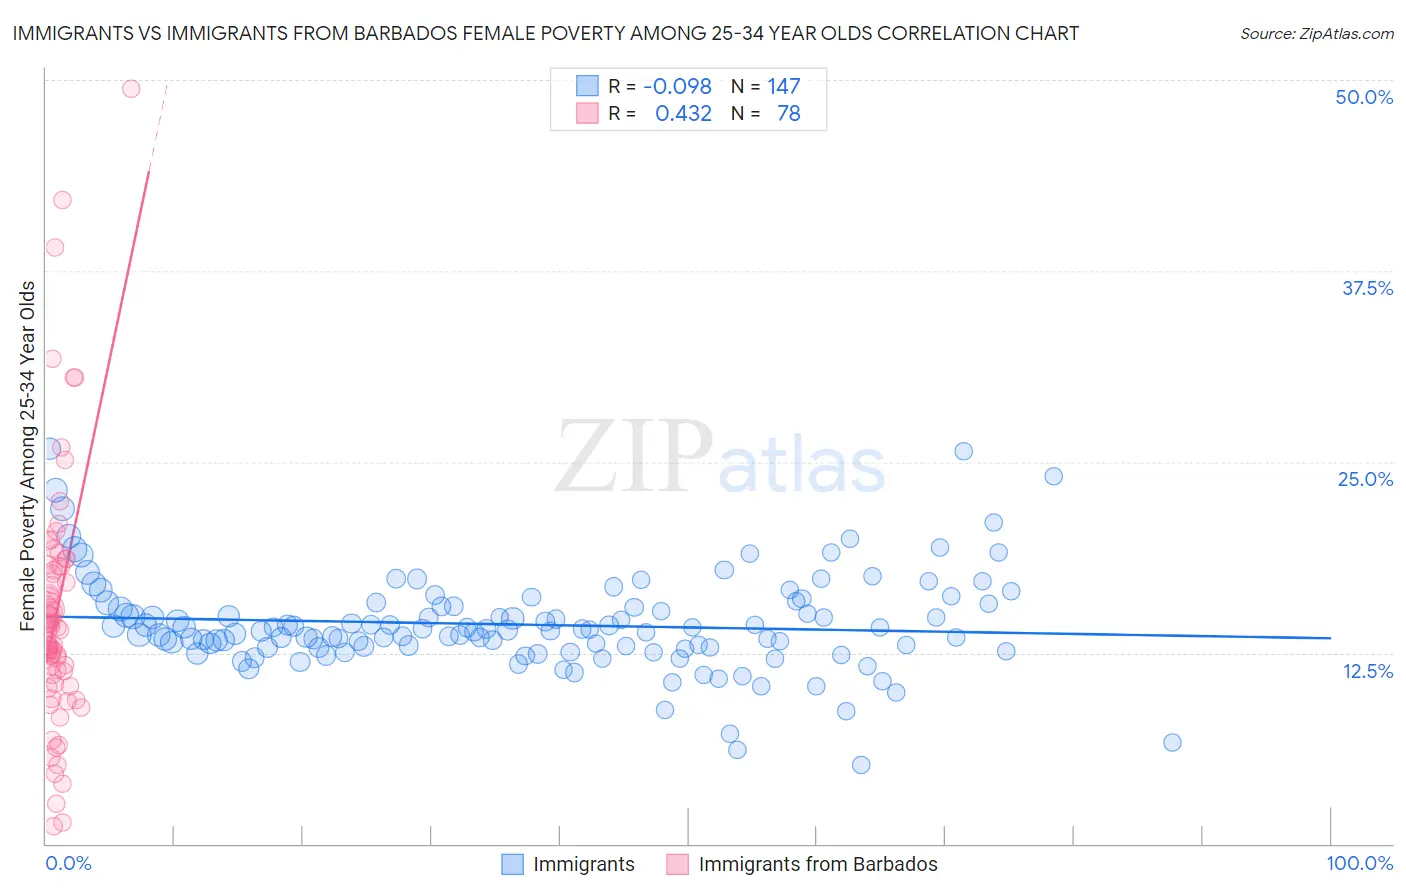 Immigrants vs Immigrants from Barbados Female Poverty Among 25-34 Year Olds